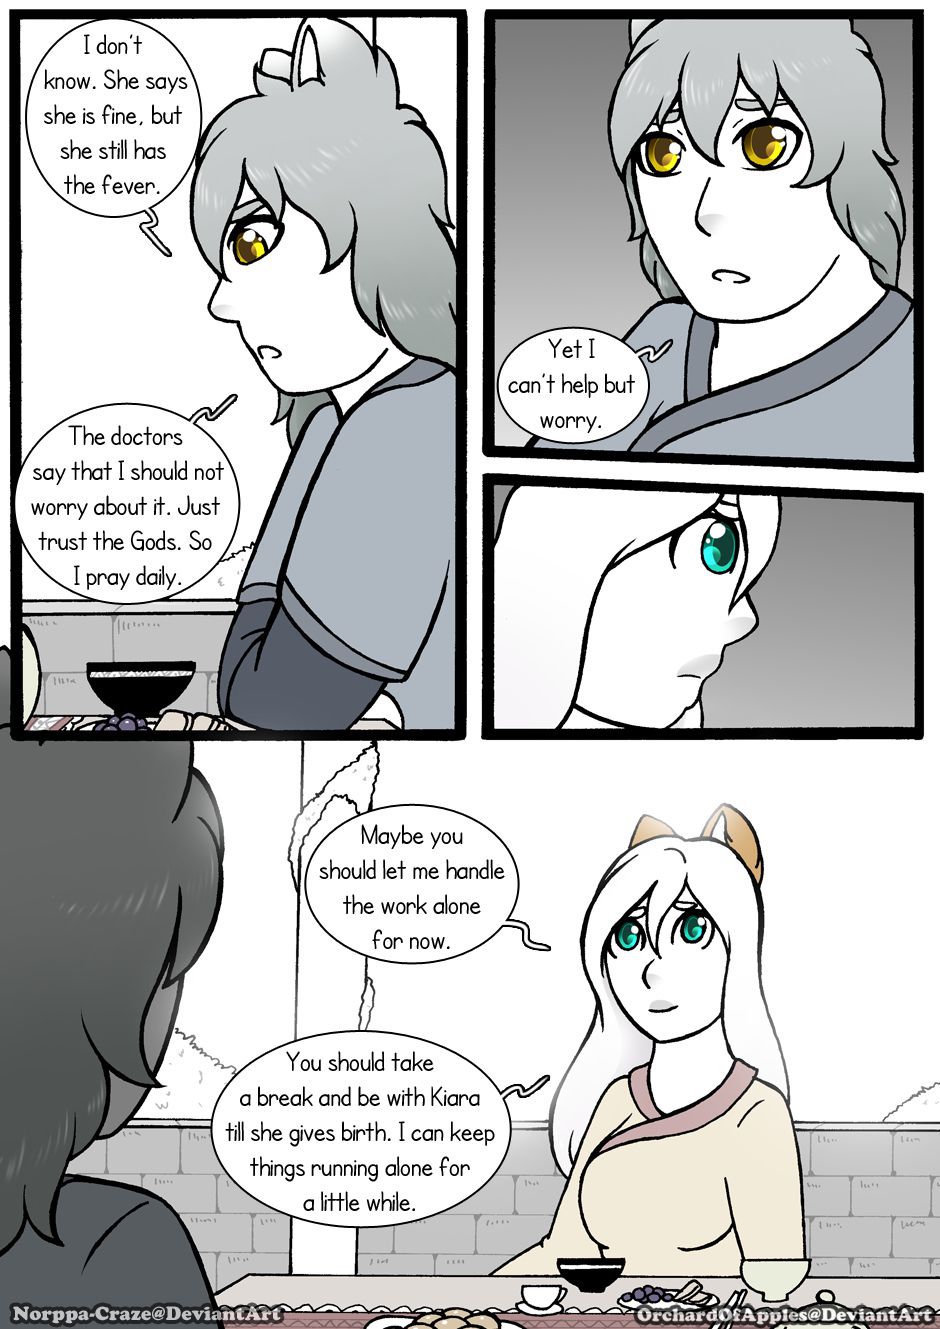 [Jeny-jen94] Between Kings and Queens [Ongoing] 319